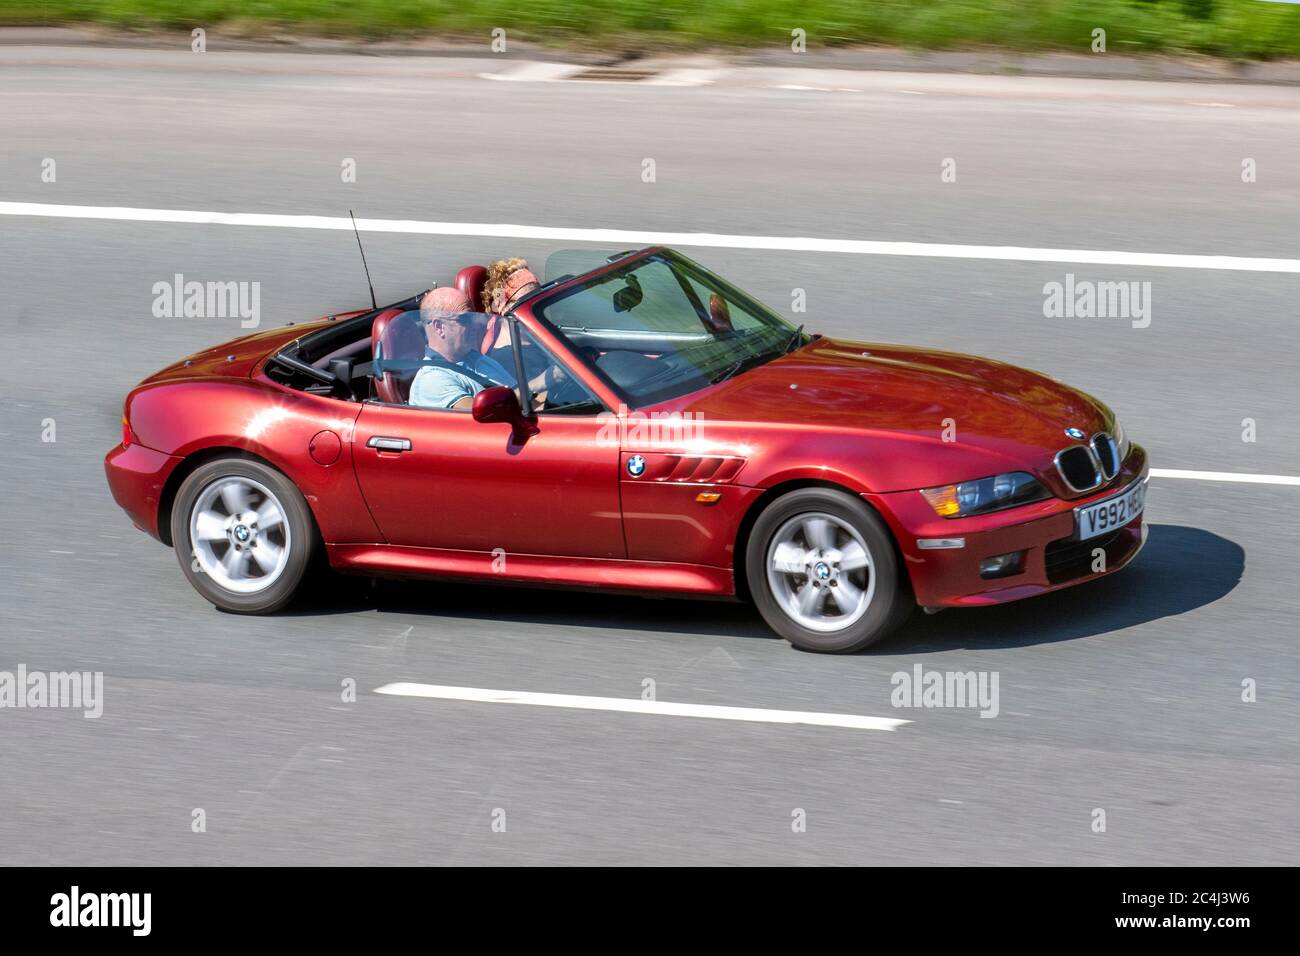 1999 90s red BMW Z3; Vehicular traffic moving vehicles, cars driving vehicle on UK roads, motors, motoring on the M6 motorway highway network. Stock Photo